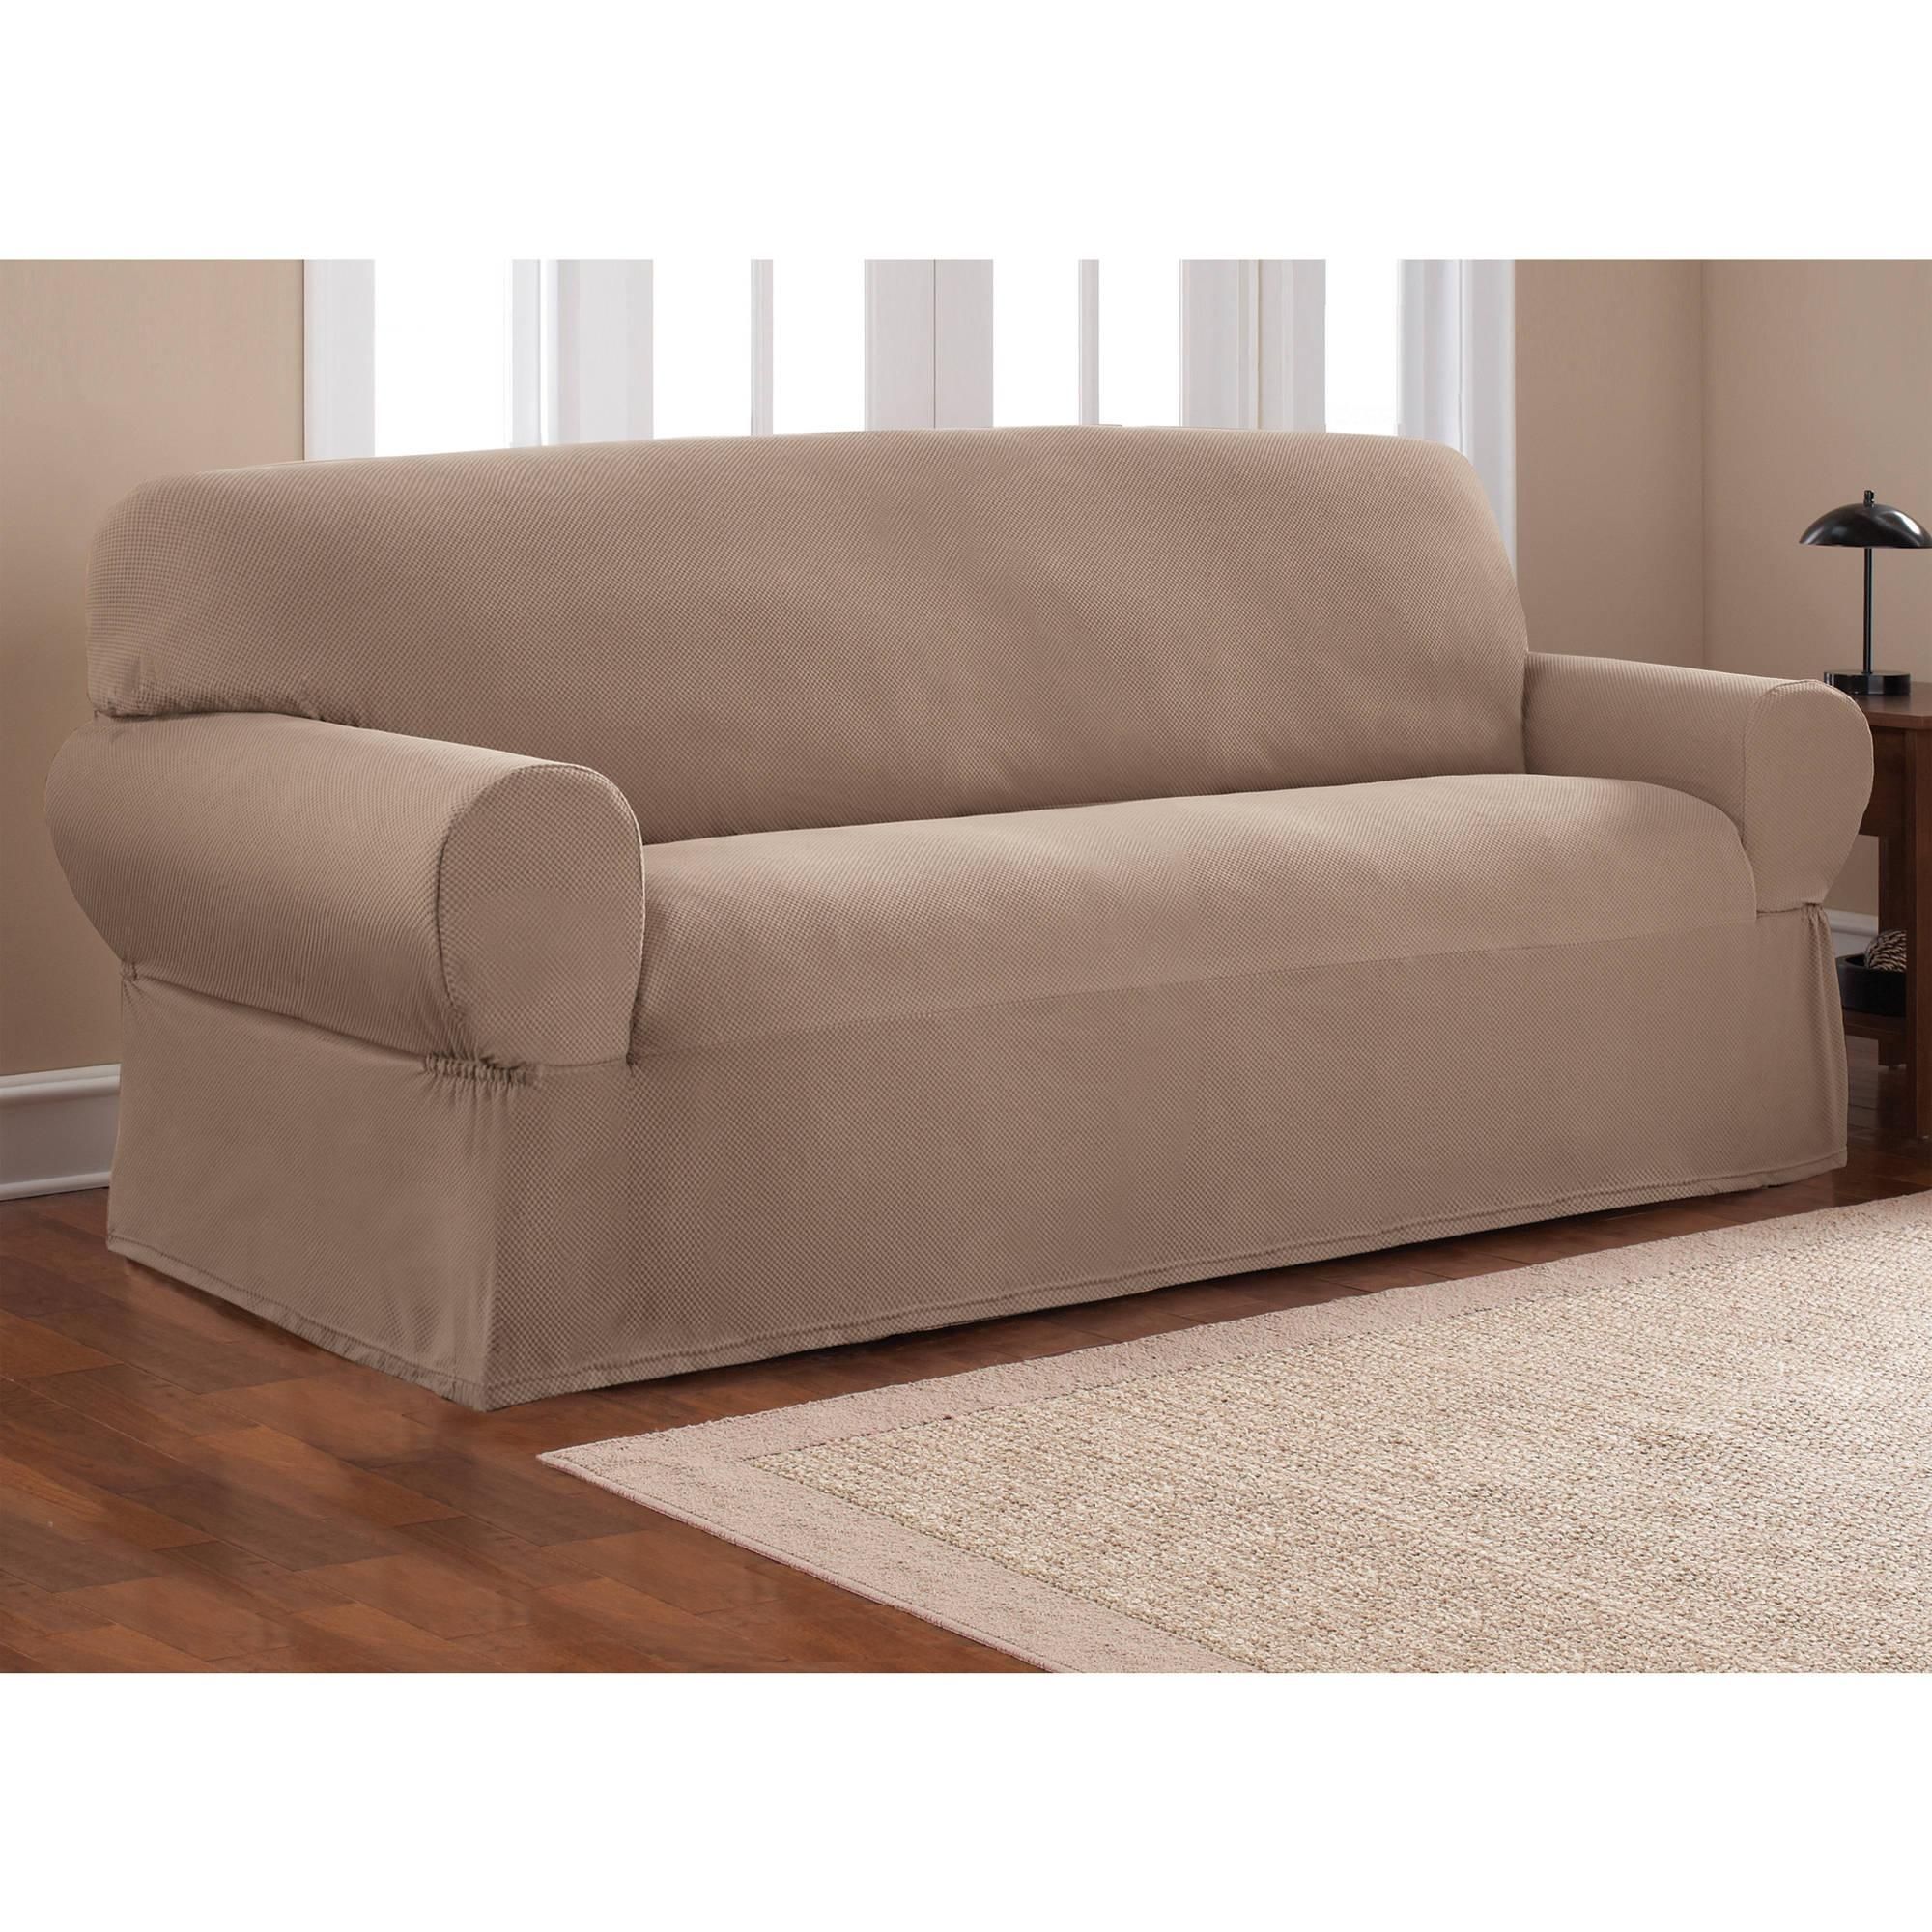 Mainstays 1 Piece Stretch Fabric Sofa Slipcover – Walmart In T Cushion Slipcovers For Large Sofas (View 10 of 20)